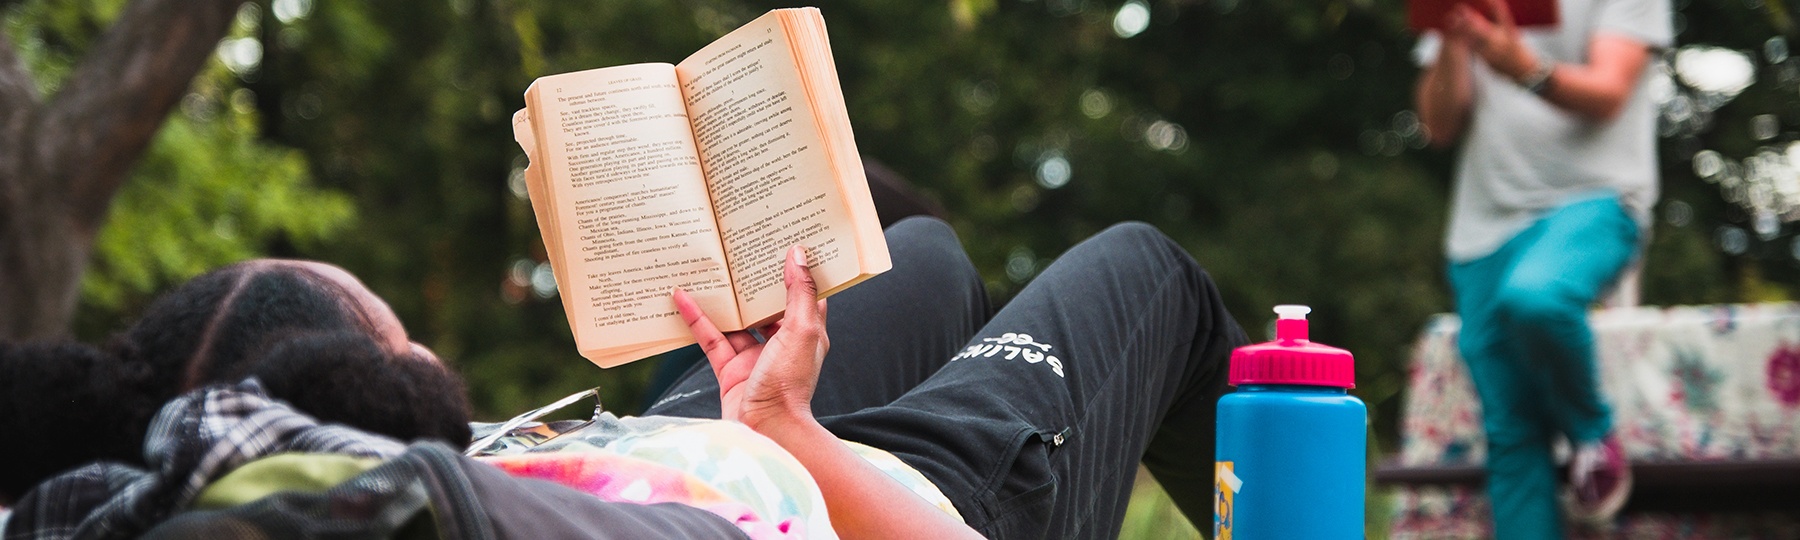 English literature student wearing black sweatpants and a tie-dye shirt lays back on the grass while holding a book up and reading during an outdoor class.